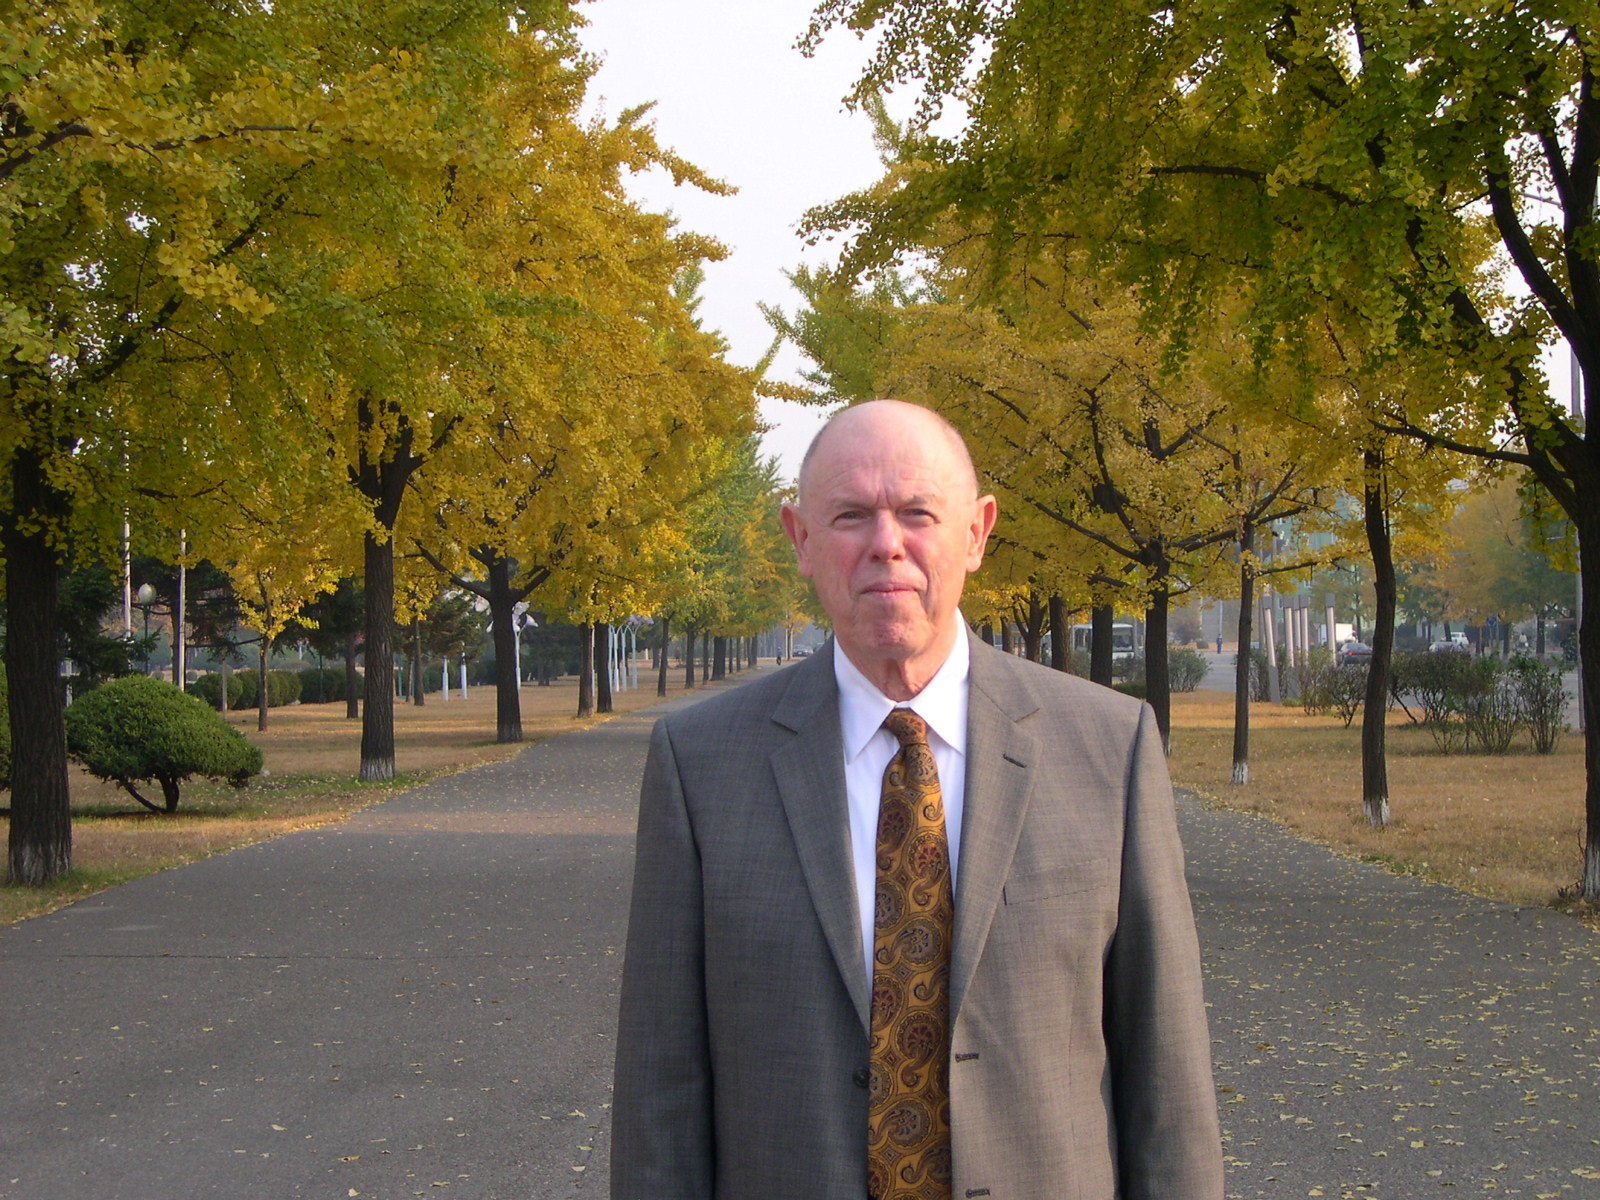 Man in suit and tie standing in a tree-lined ally